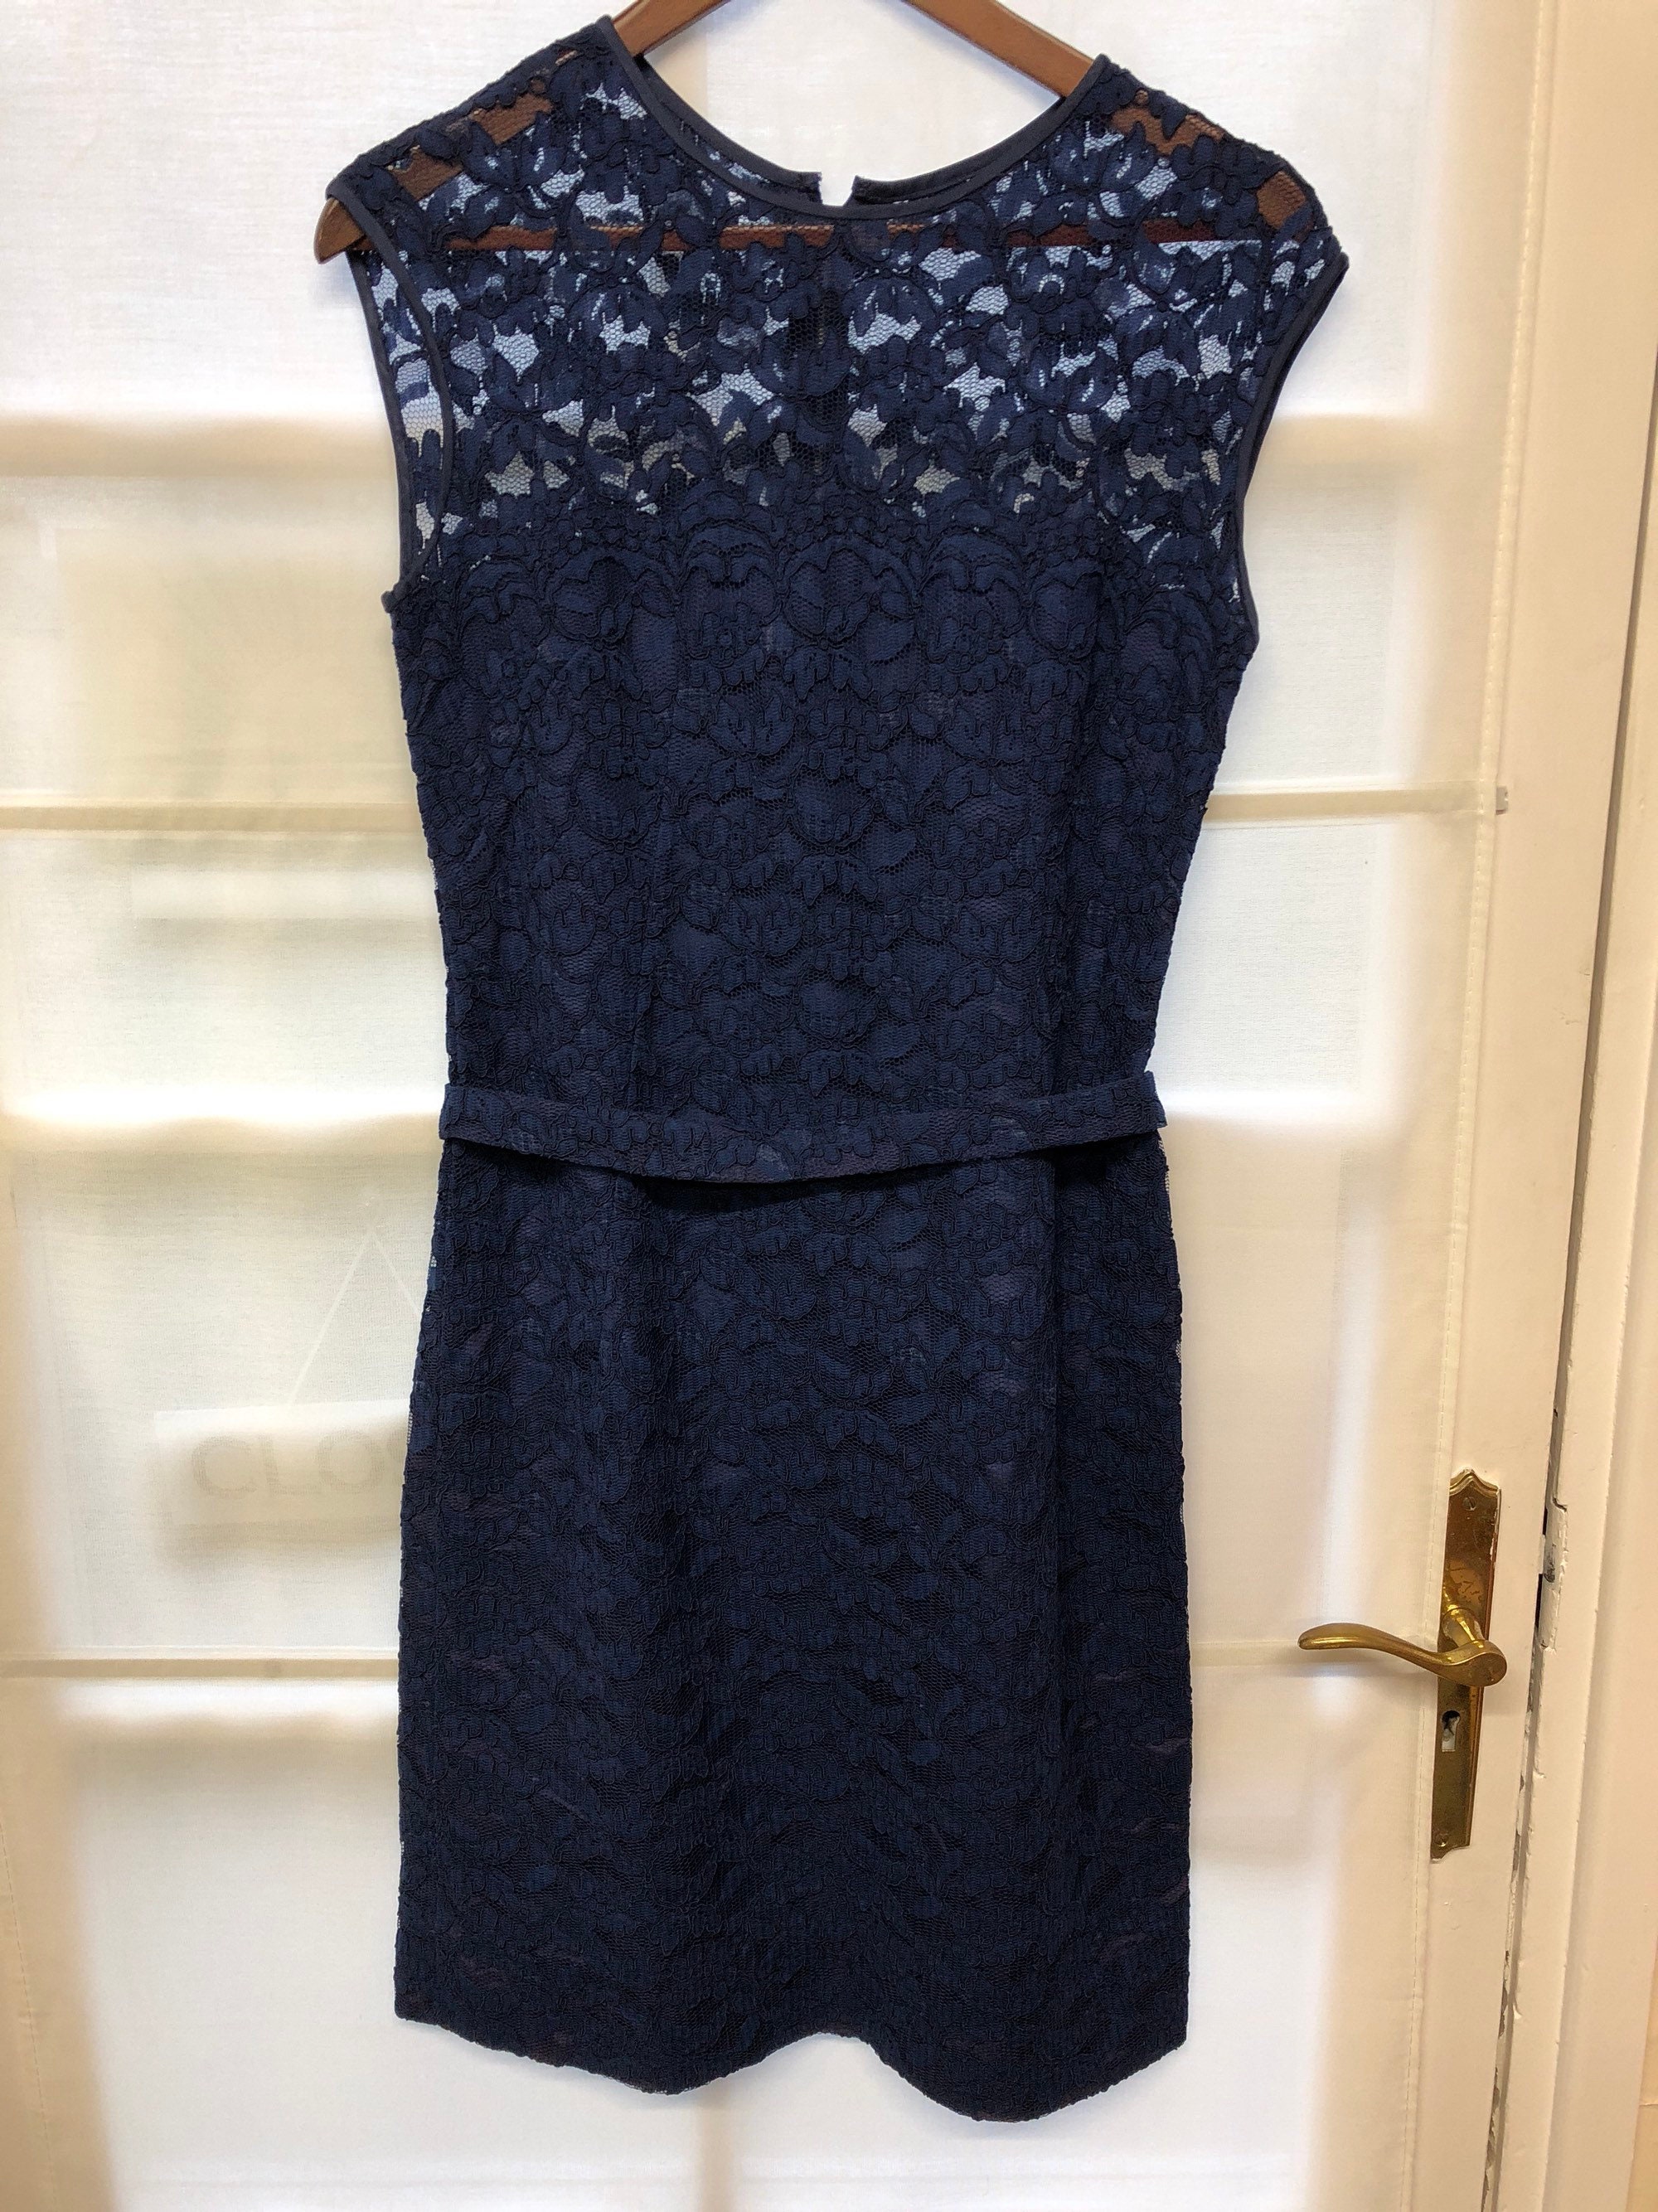 Margot Bywaters London navy blue lace dress and jacket wuth | Etsy